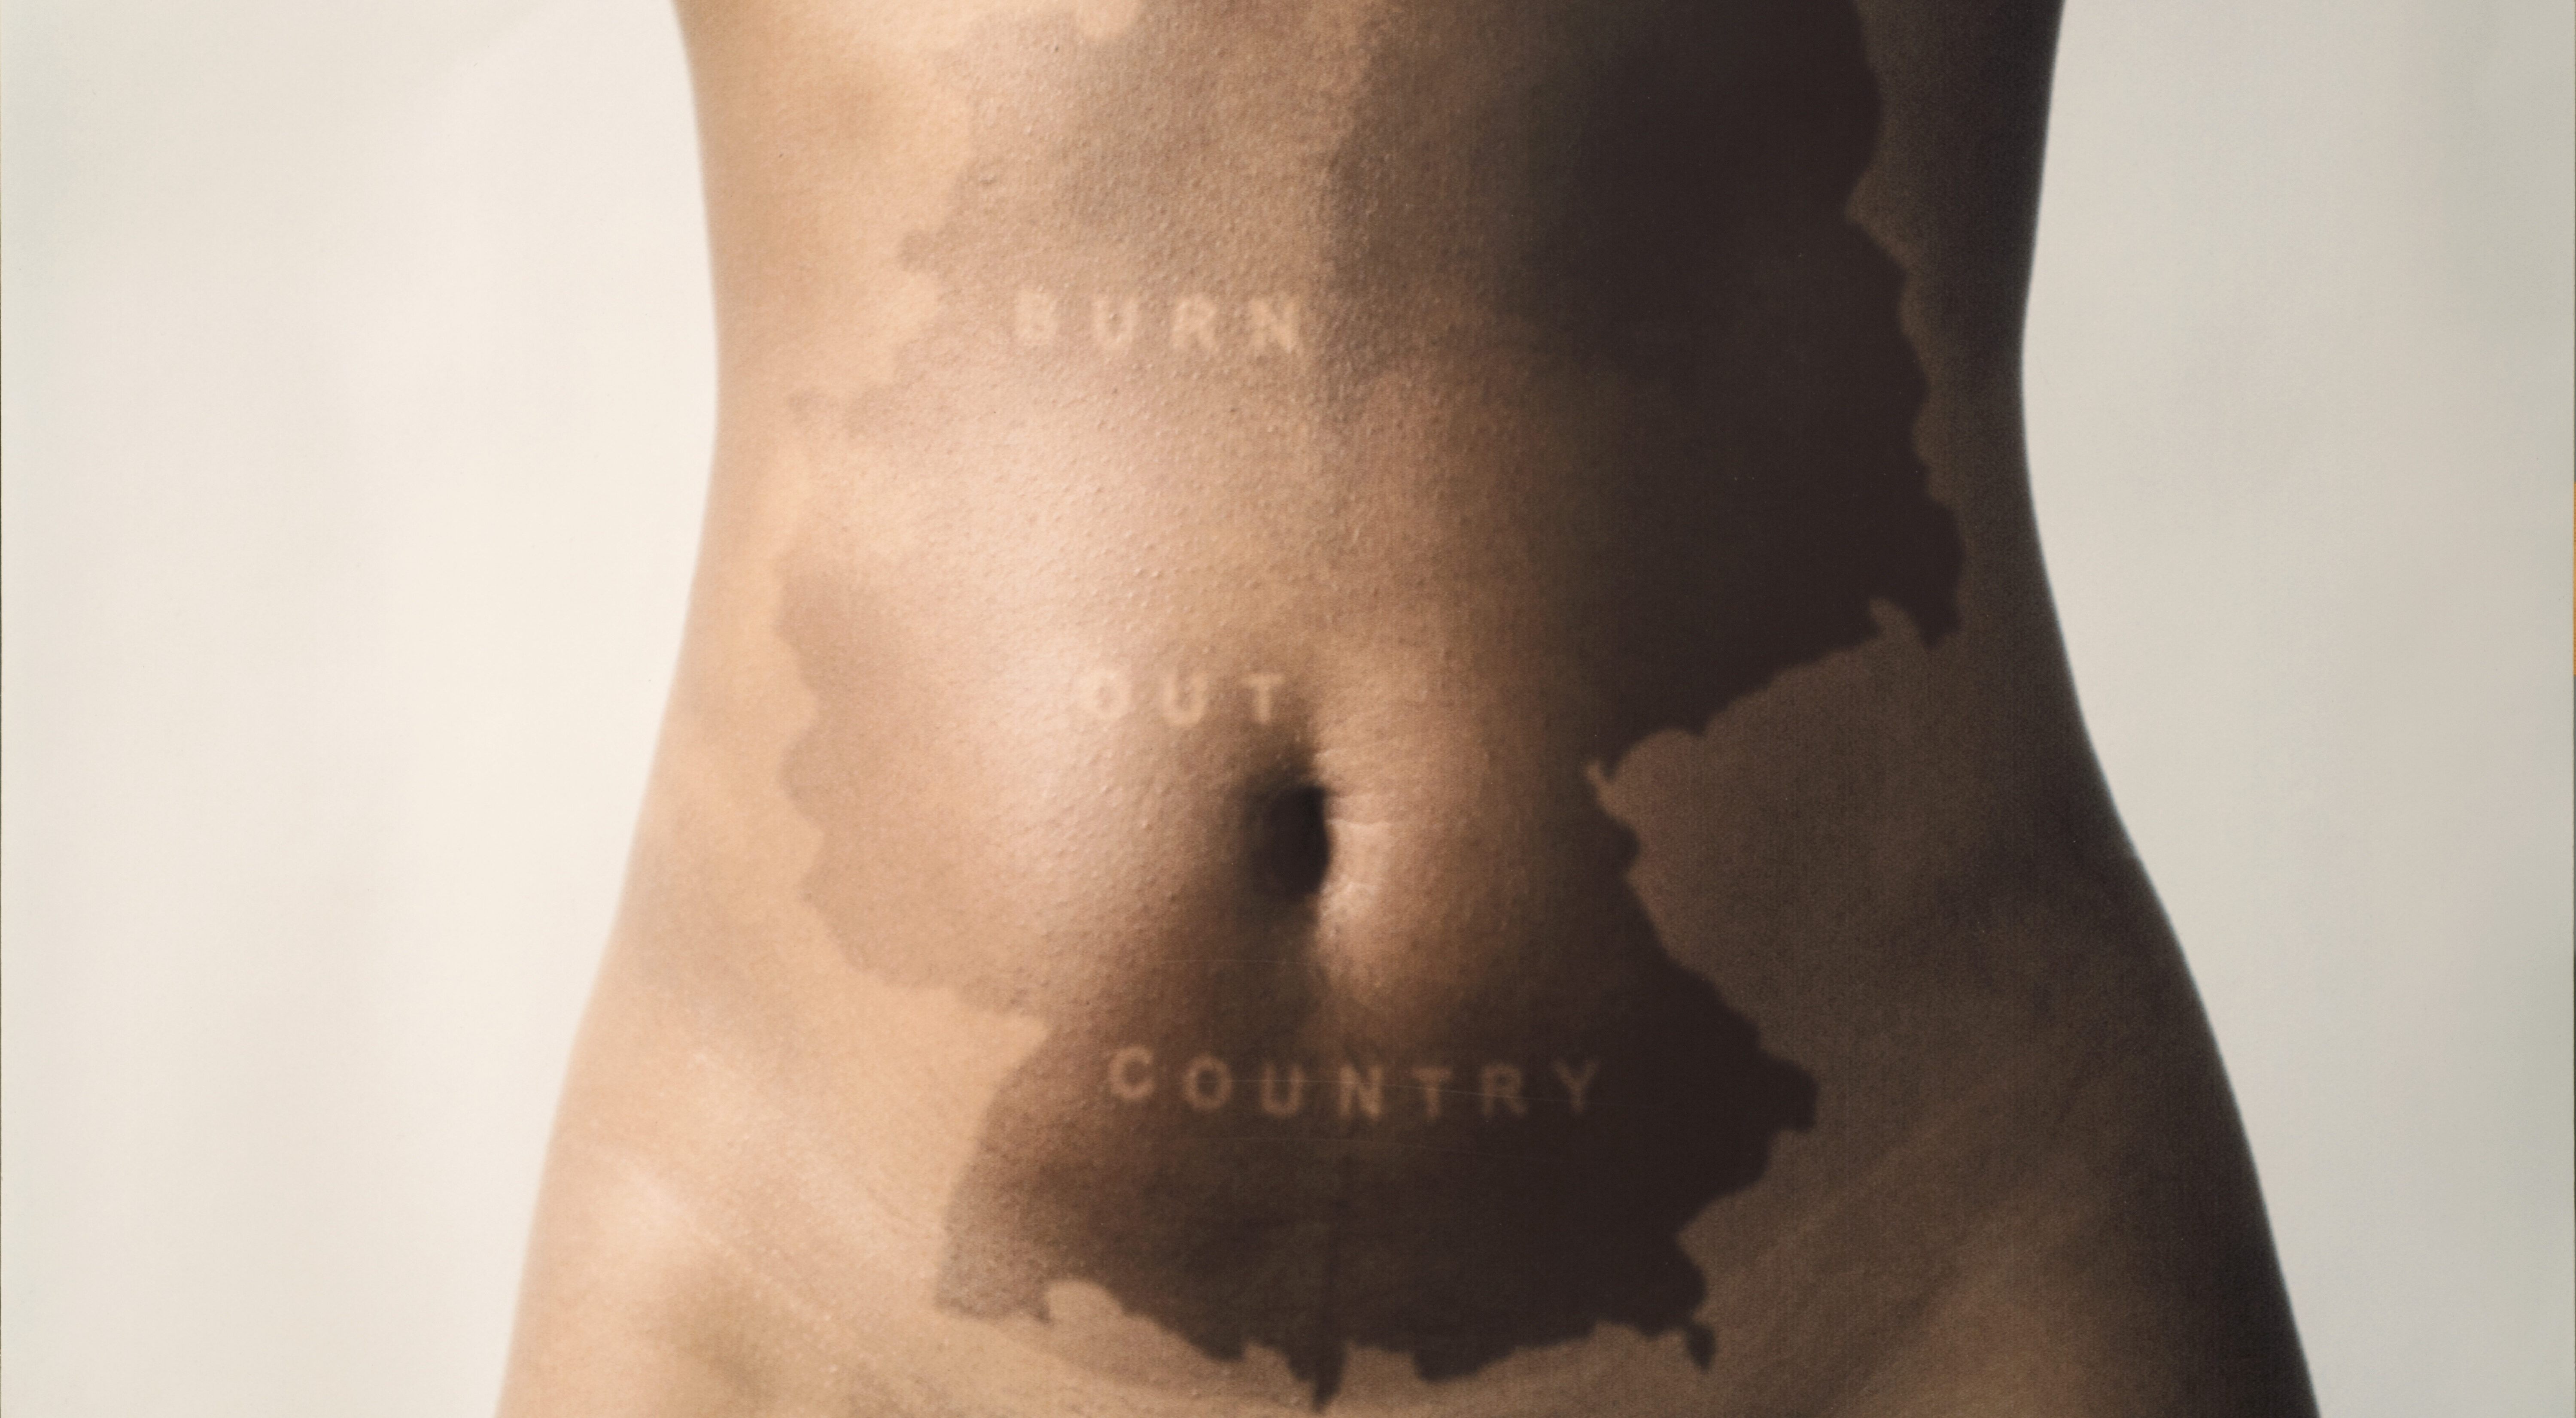 The nude torso of a woman is pictured from sternum to hip. In the center of her stomach a darker patch of skin makes the outline of Germany. Through the darker skin, light letter run diagonally that read 